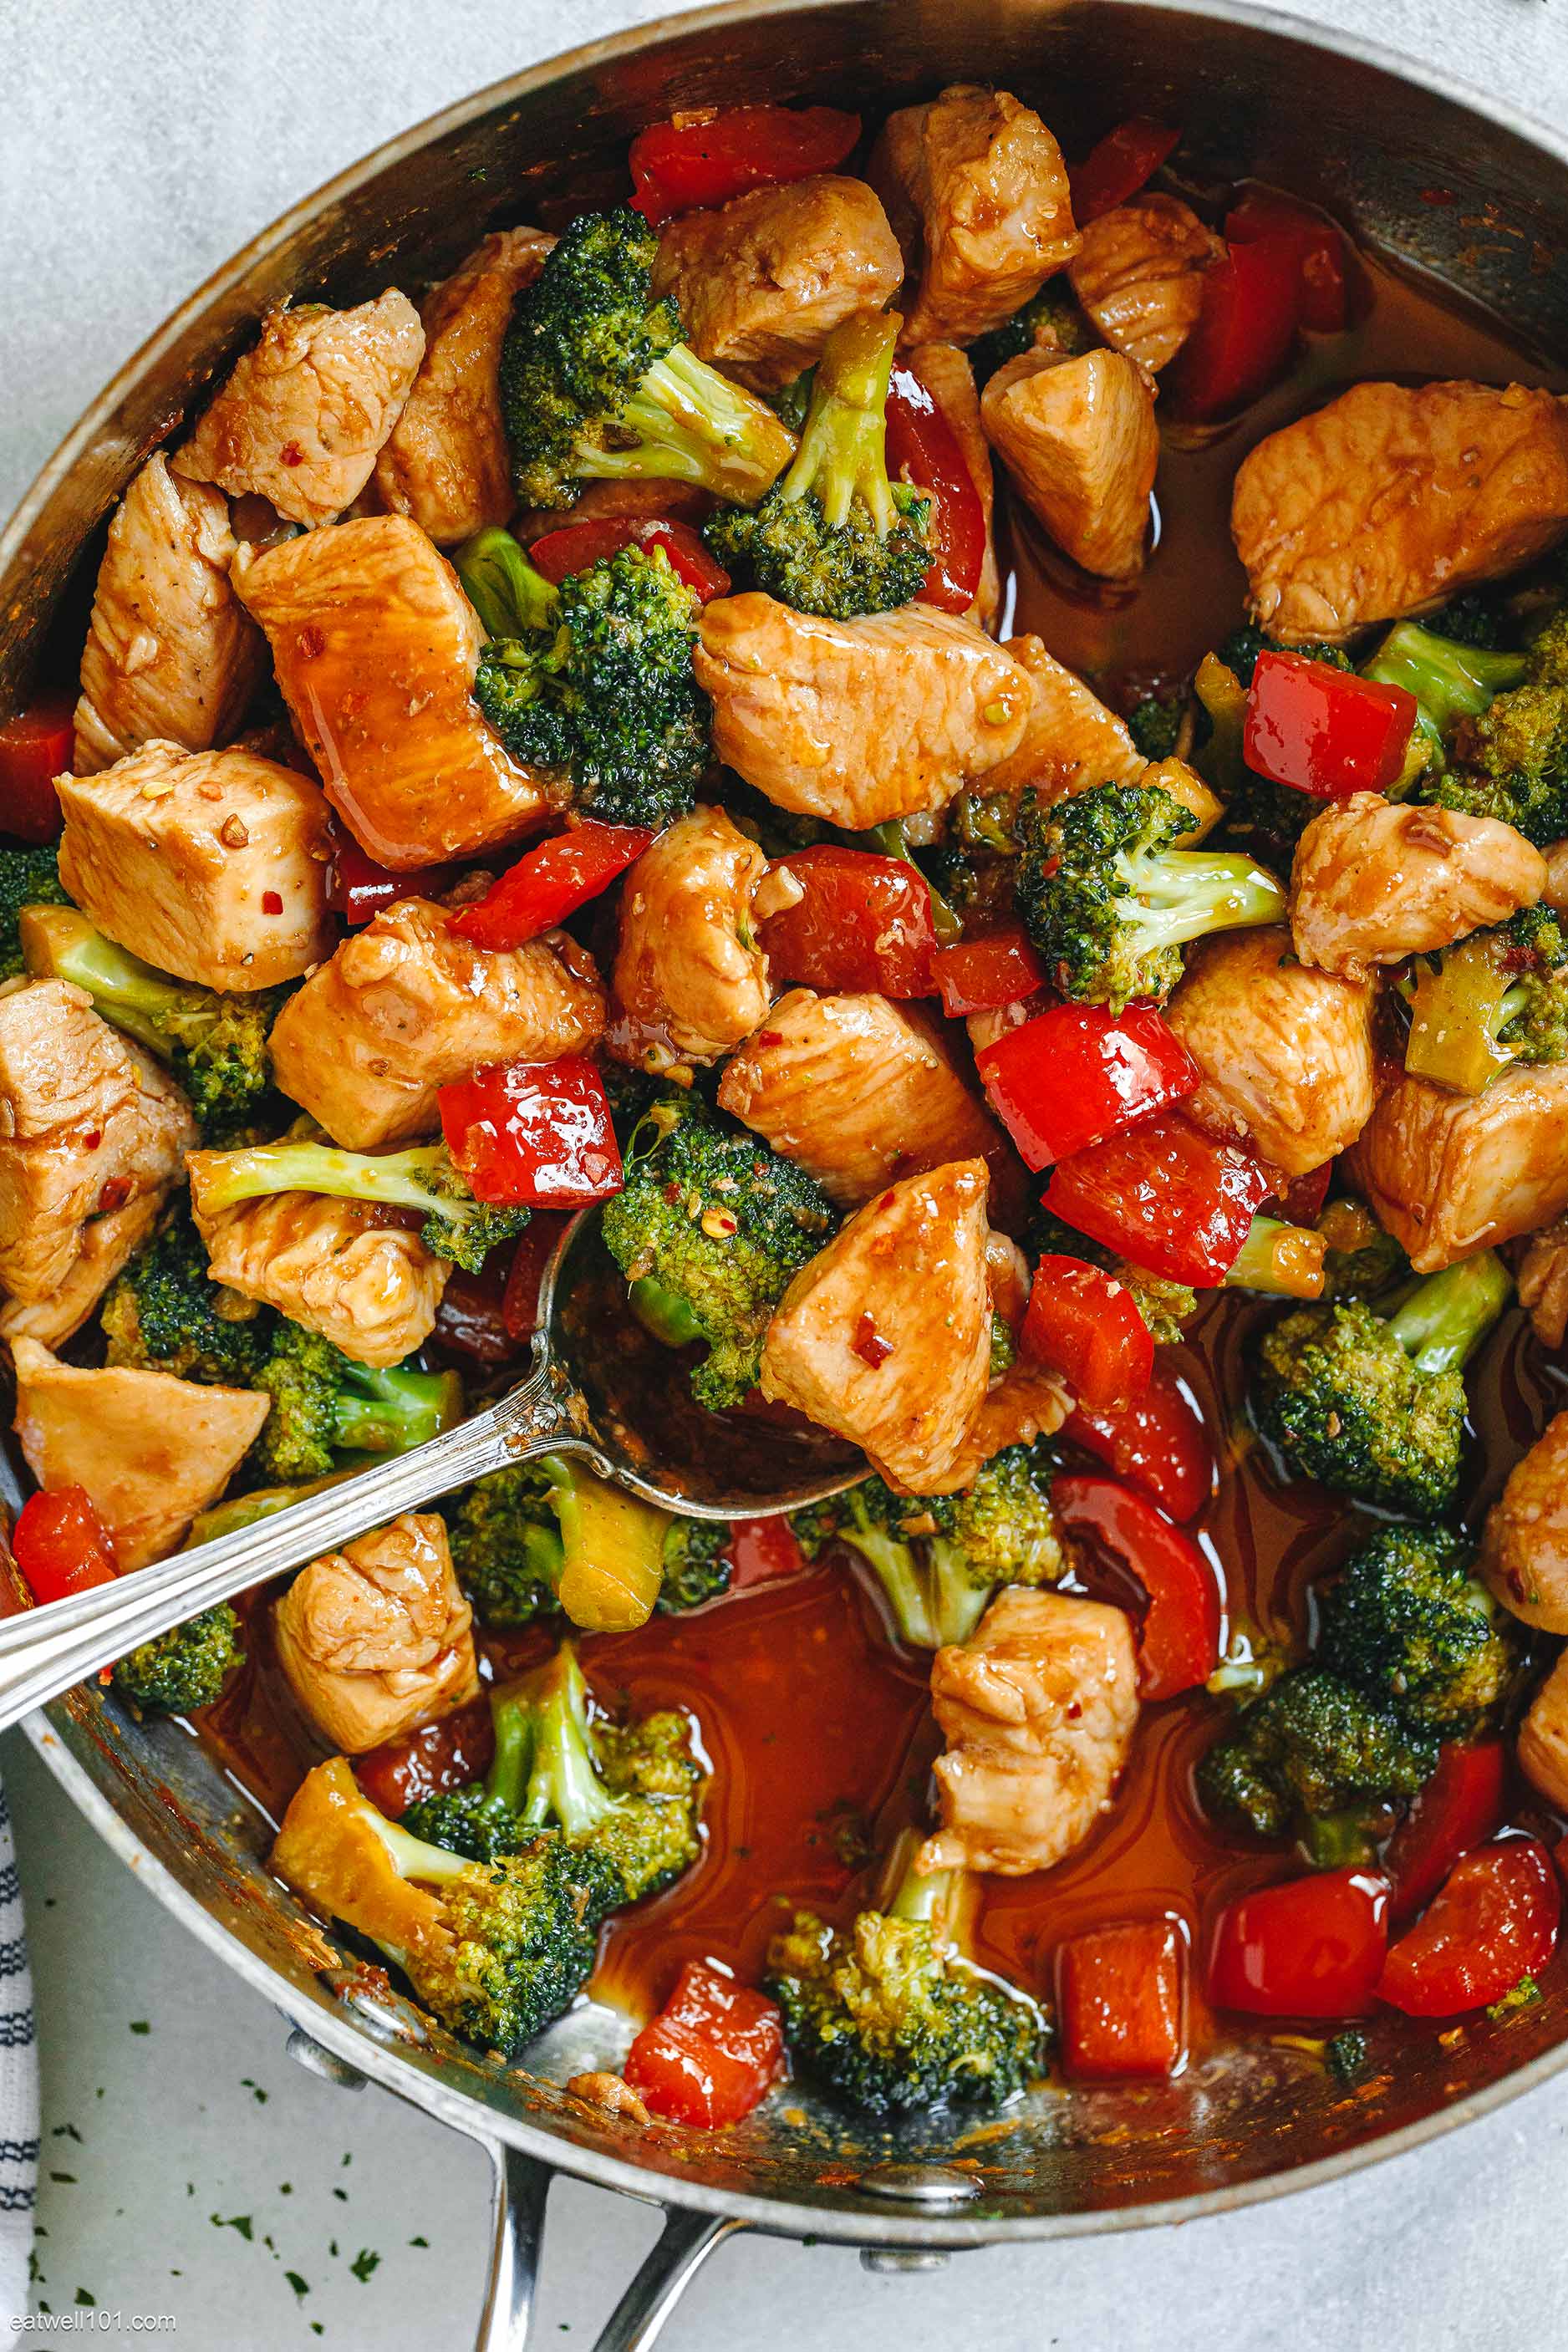 Chicken Stir Fry Recipe With Broccoli And Bell Pepper Easy Chicken